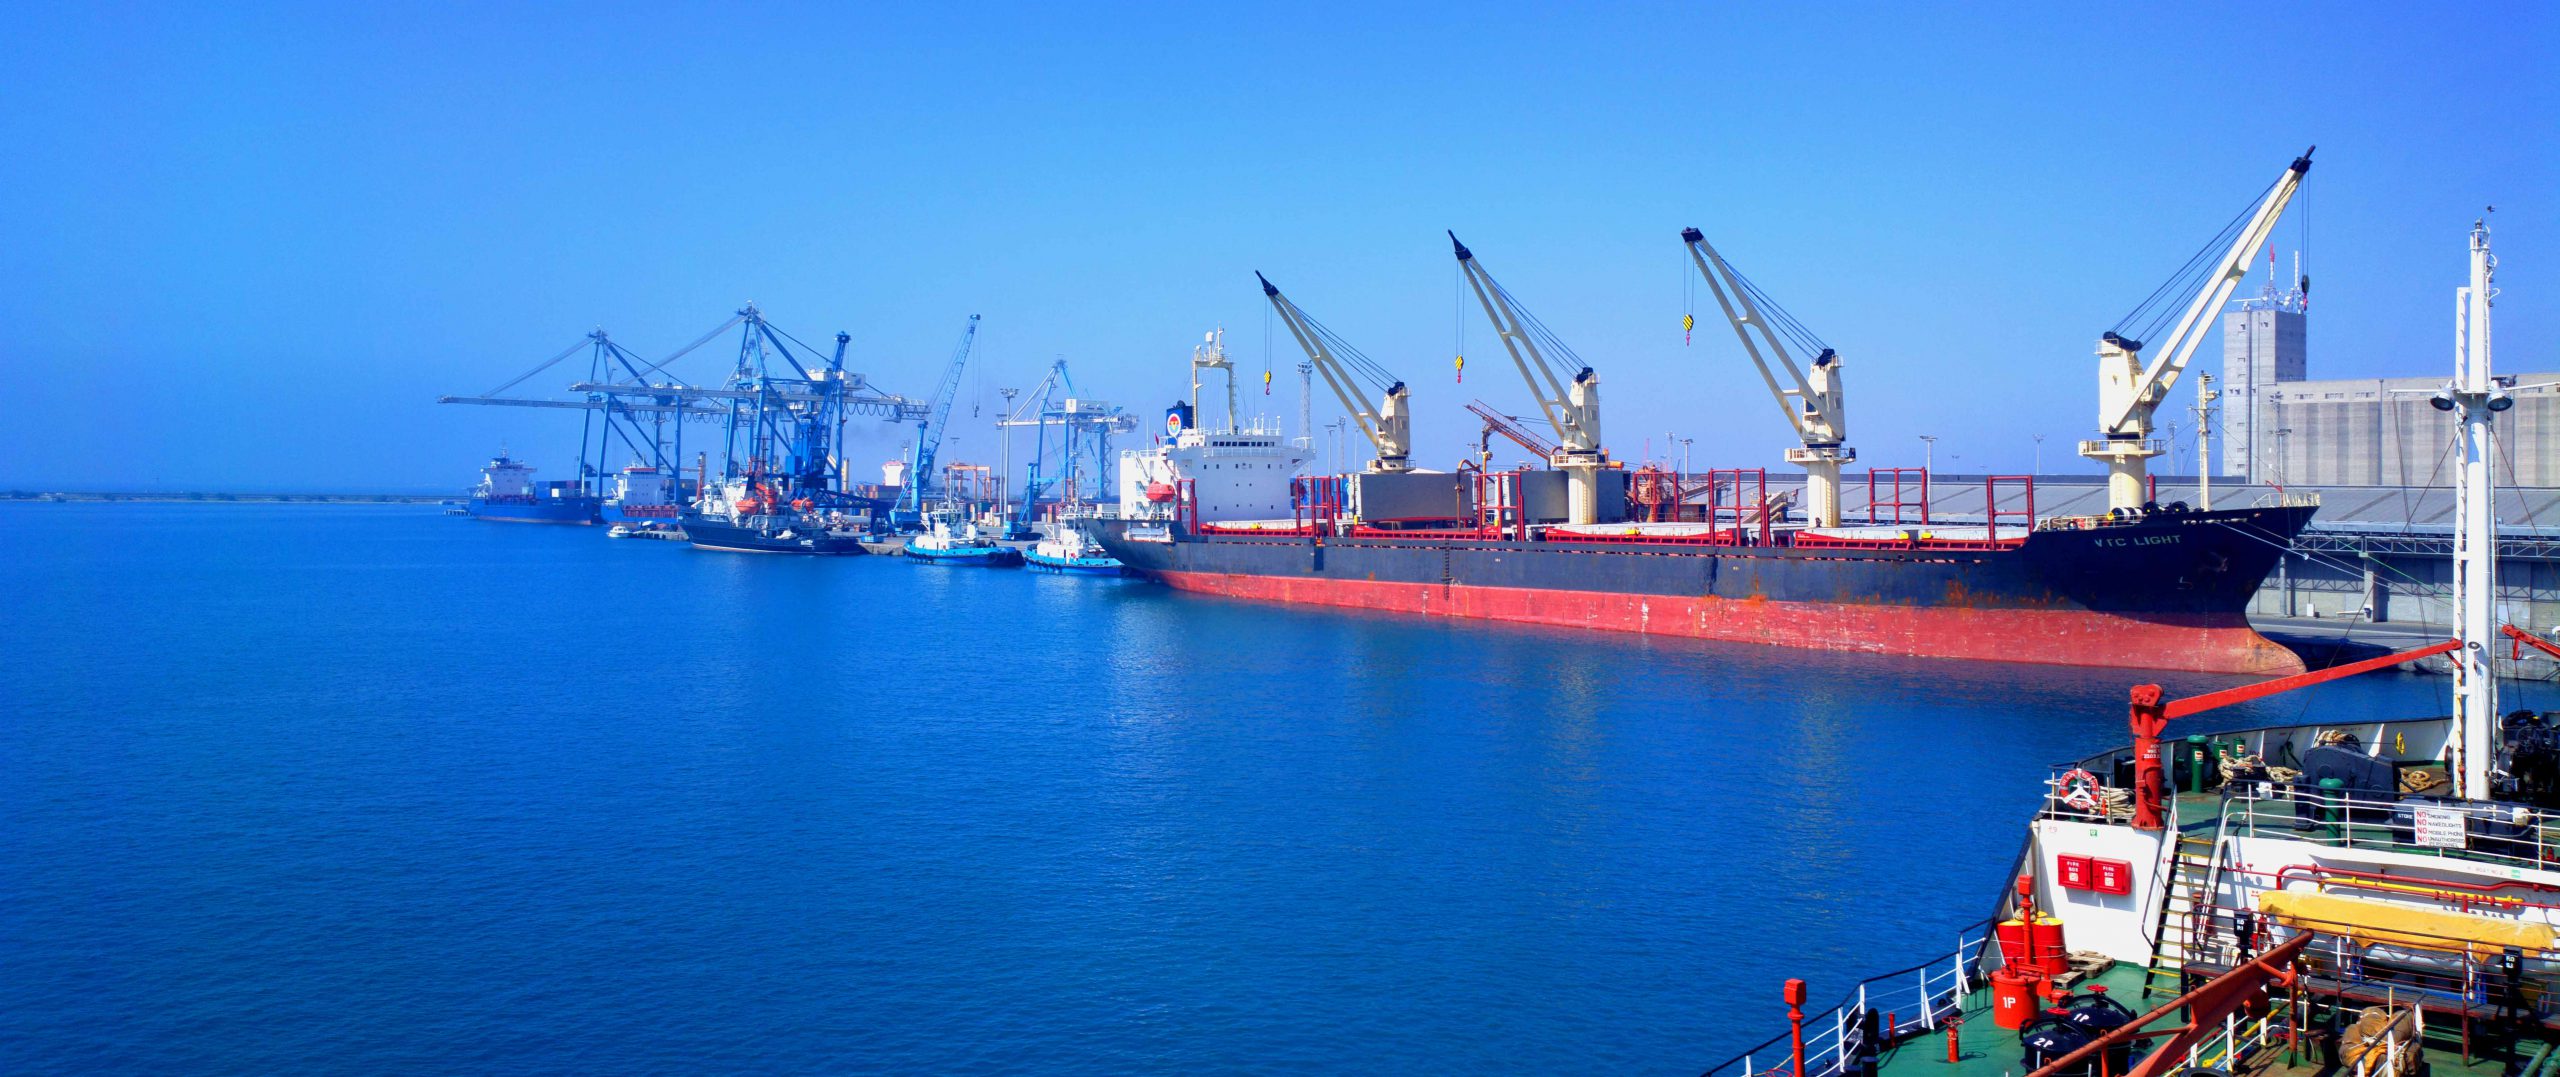 Reminder of restrictions on vessel calls to Northern Cyprus ports